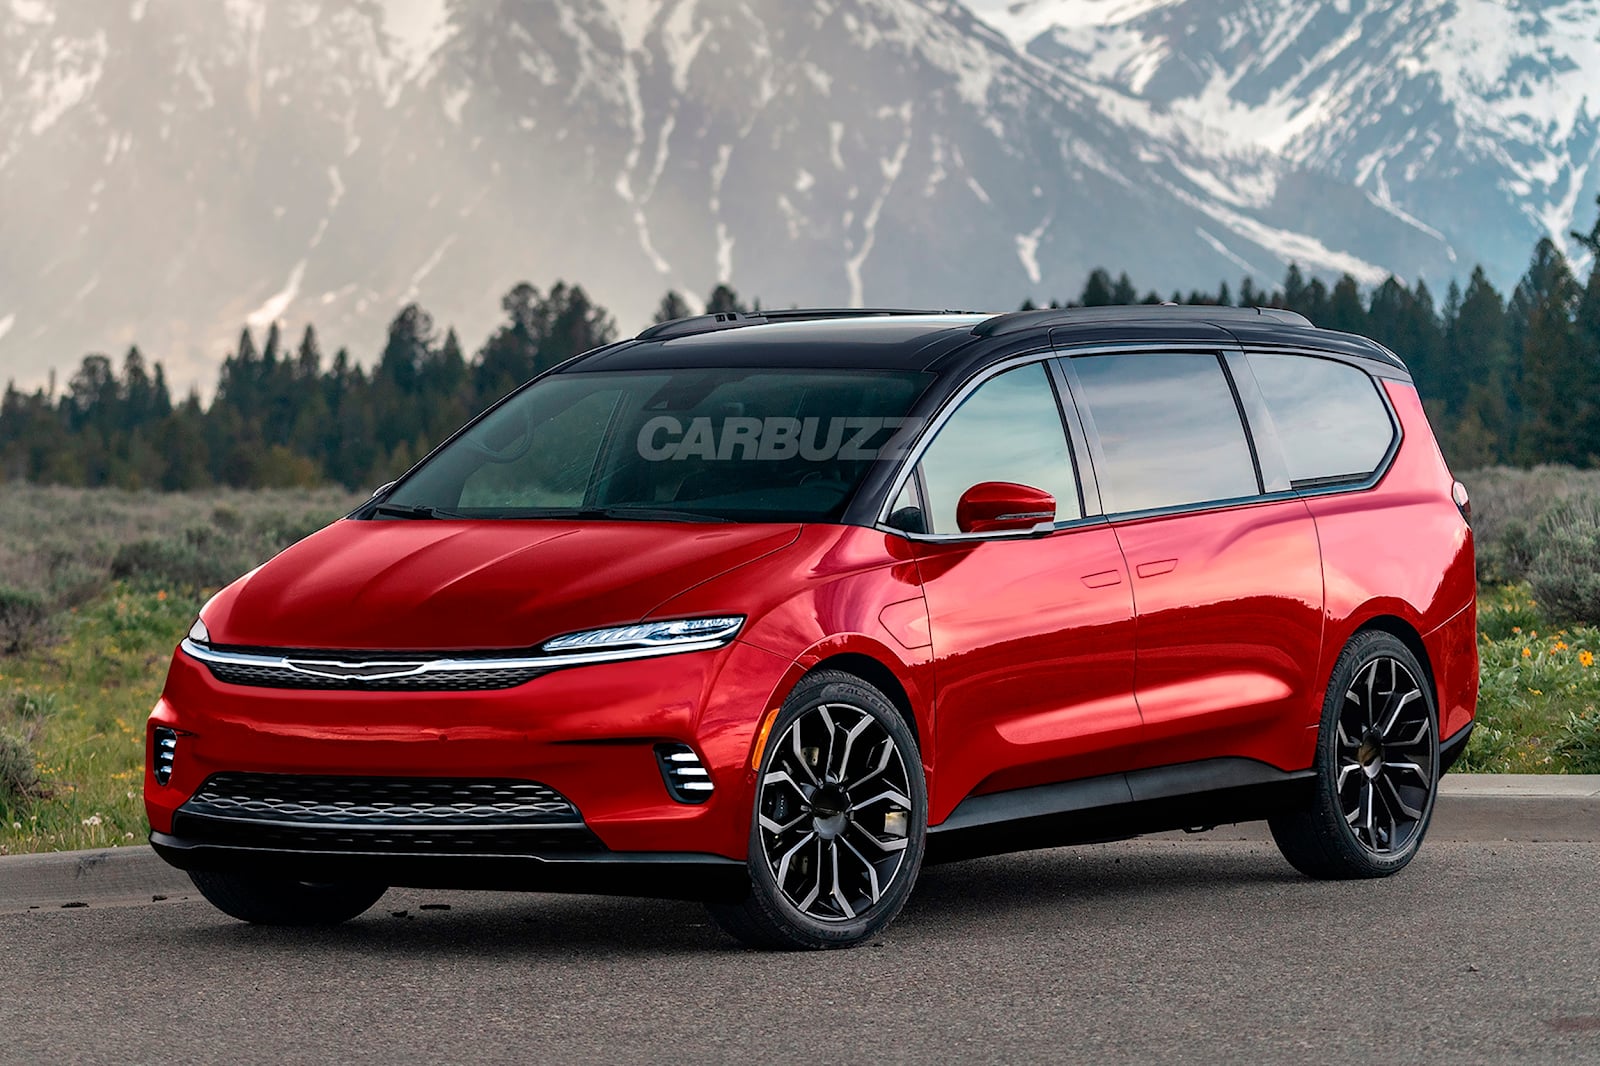 Soccer Moms Will Love The Electric Chrysler Pacifica Minivan CarBuzz